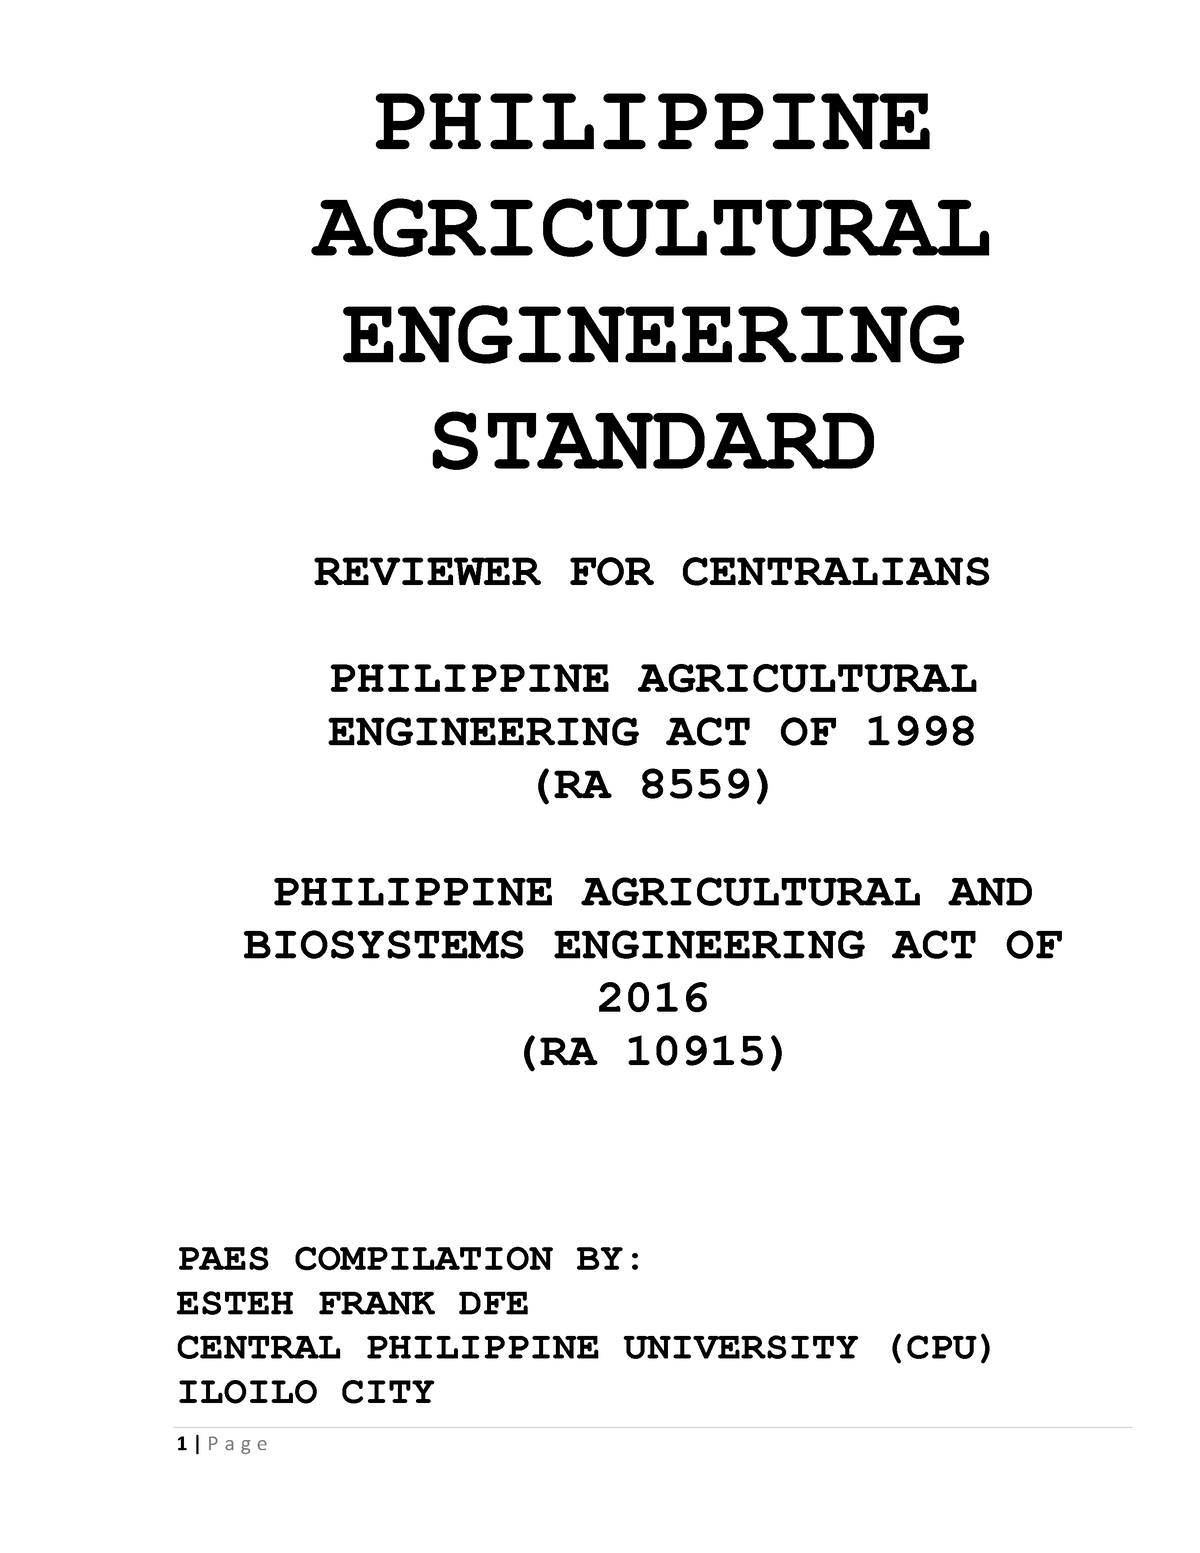 thesis title for agricultural engineering in the philippines